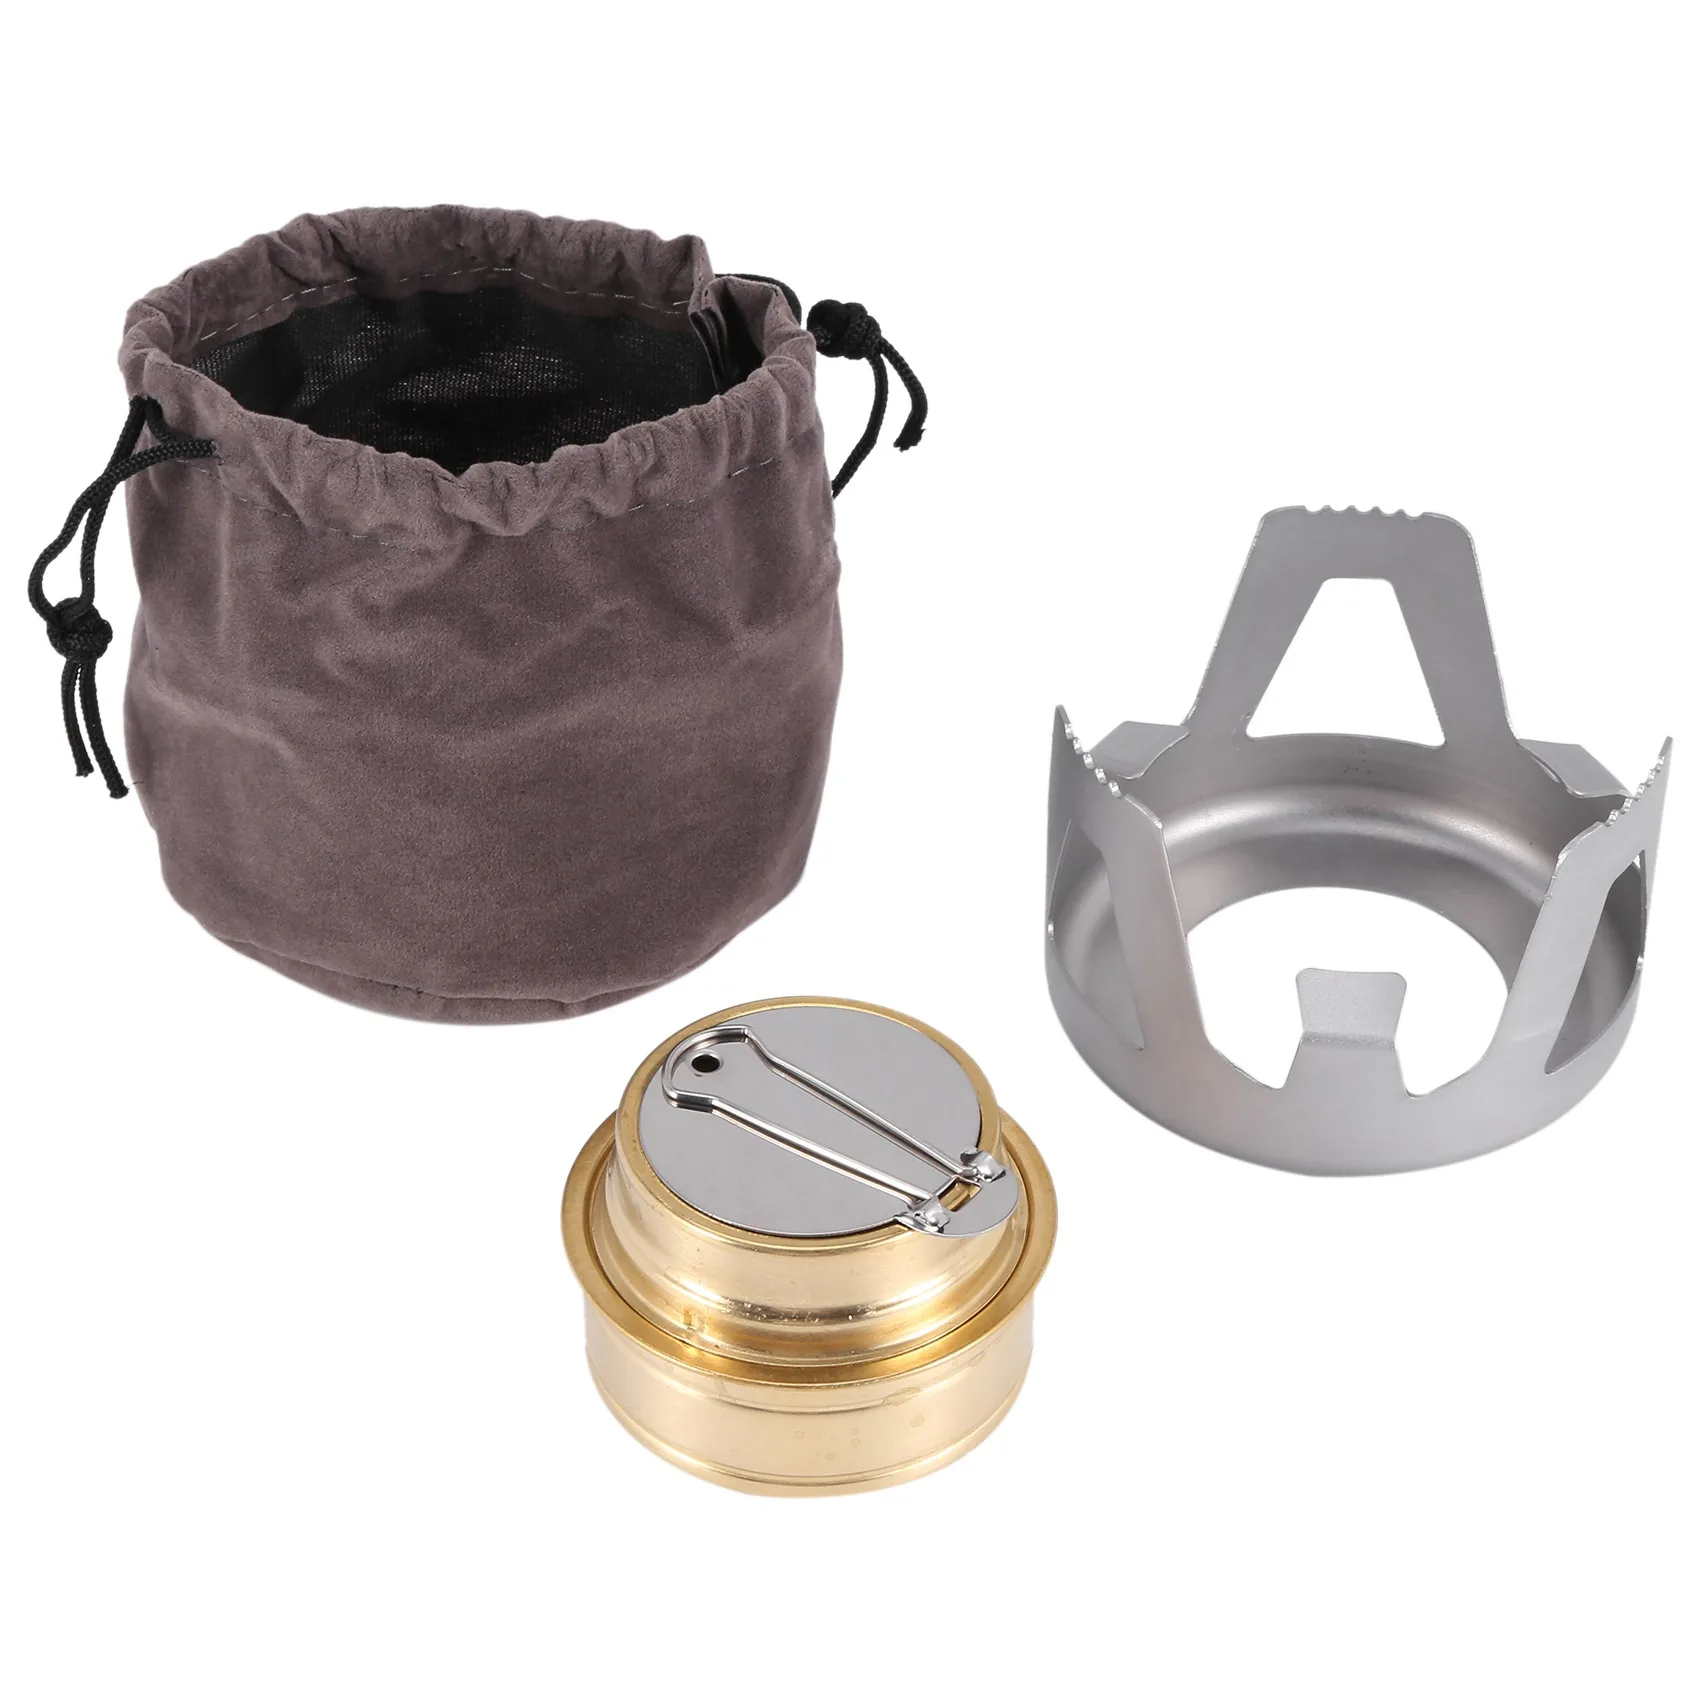 

Camping Cooking Stove Mini Backpacking Stove Lightweight Brass Spirit Burner with Stand for Camping Hiking Picnic A